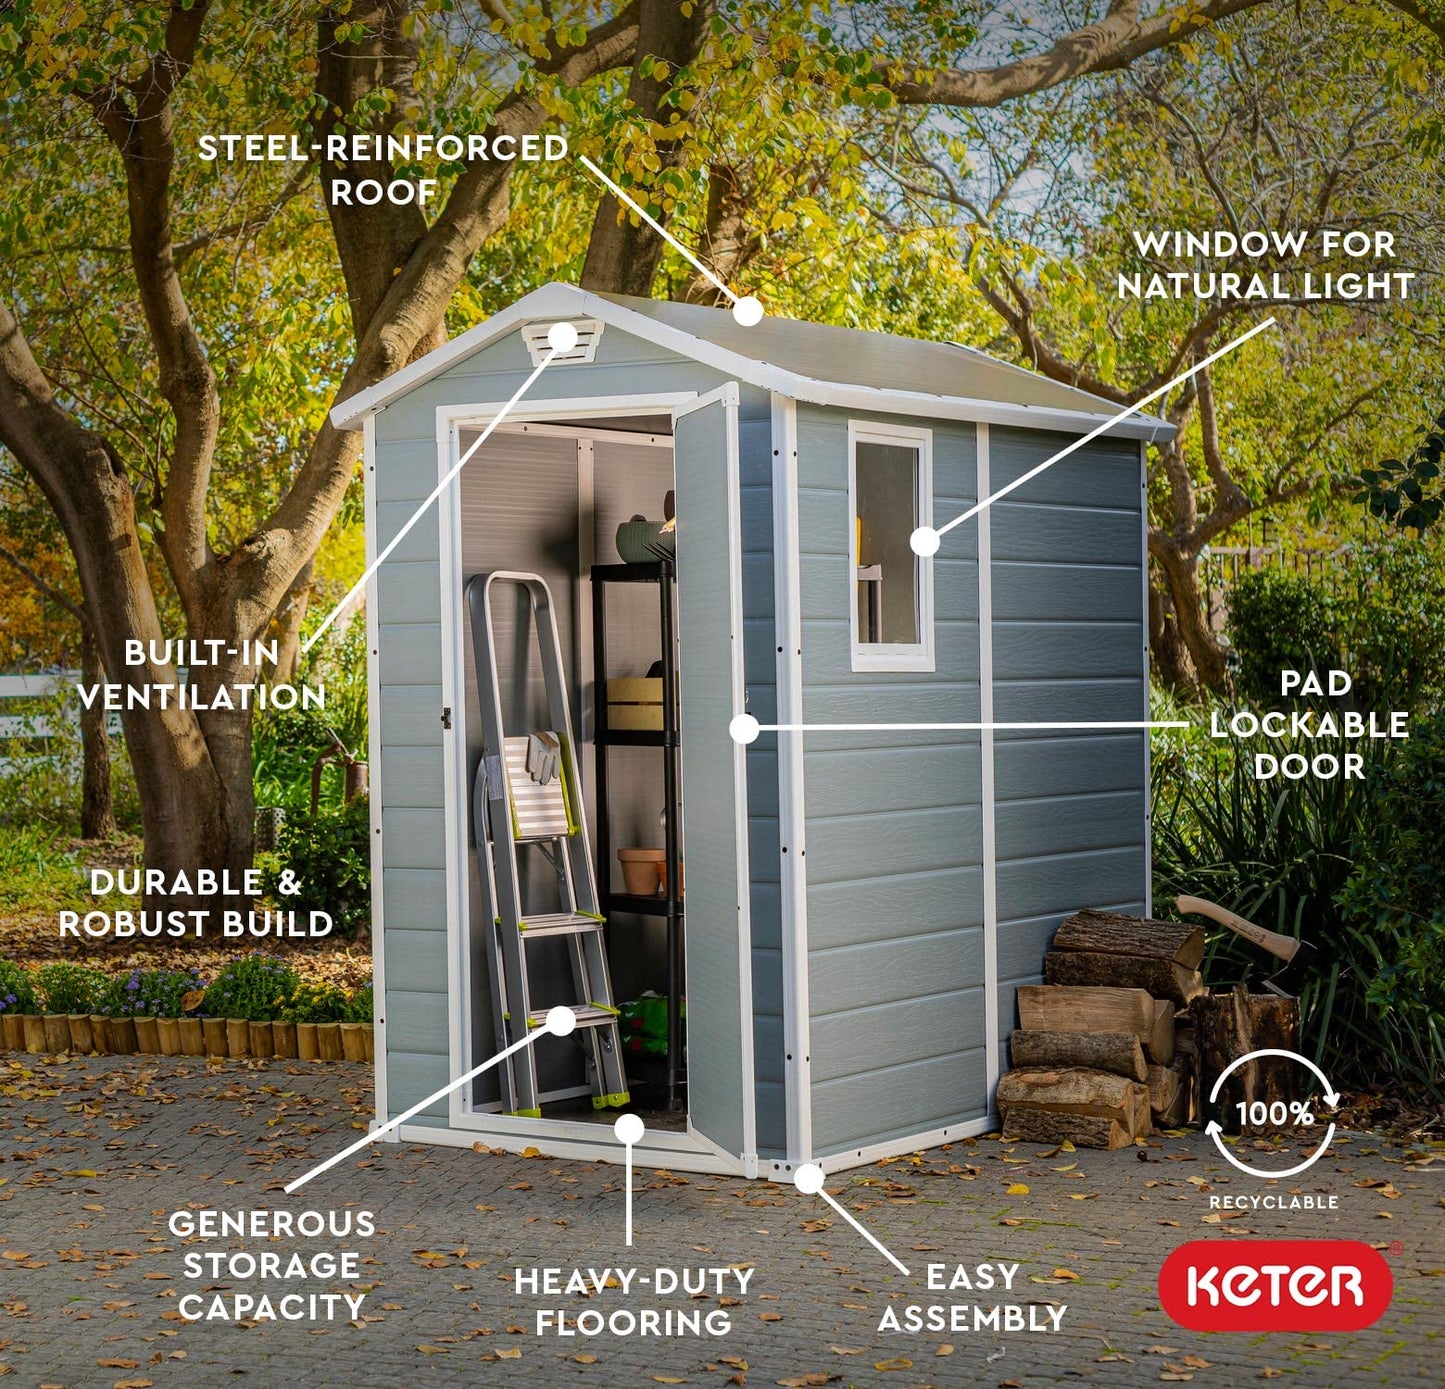 Keter Manor 4x6 Resin Outdoor Storage Shed Kit-Perfect to Store Patio Furniture, Garden Tools Bike Accessories, Beach Chairs and Lawn Mower, Grey & White